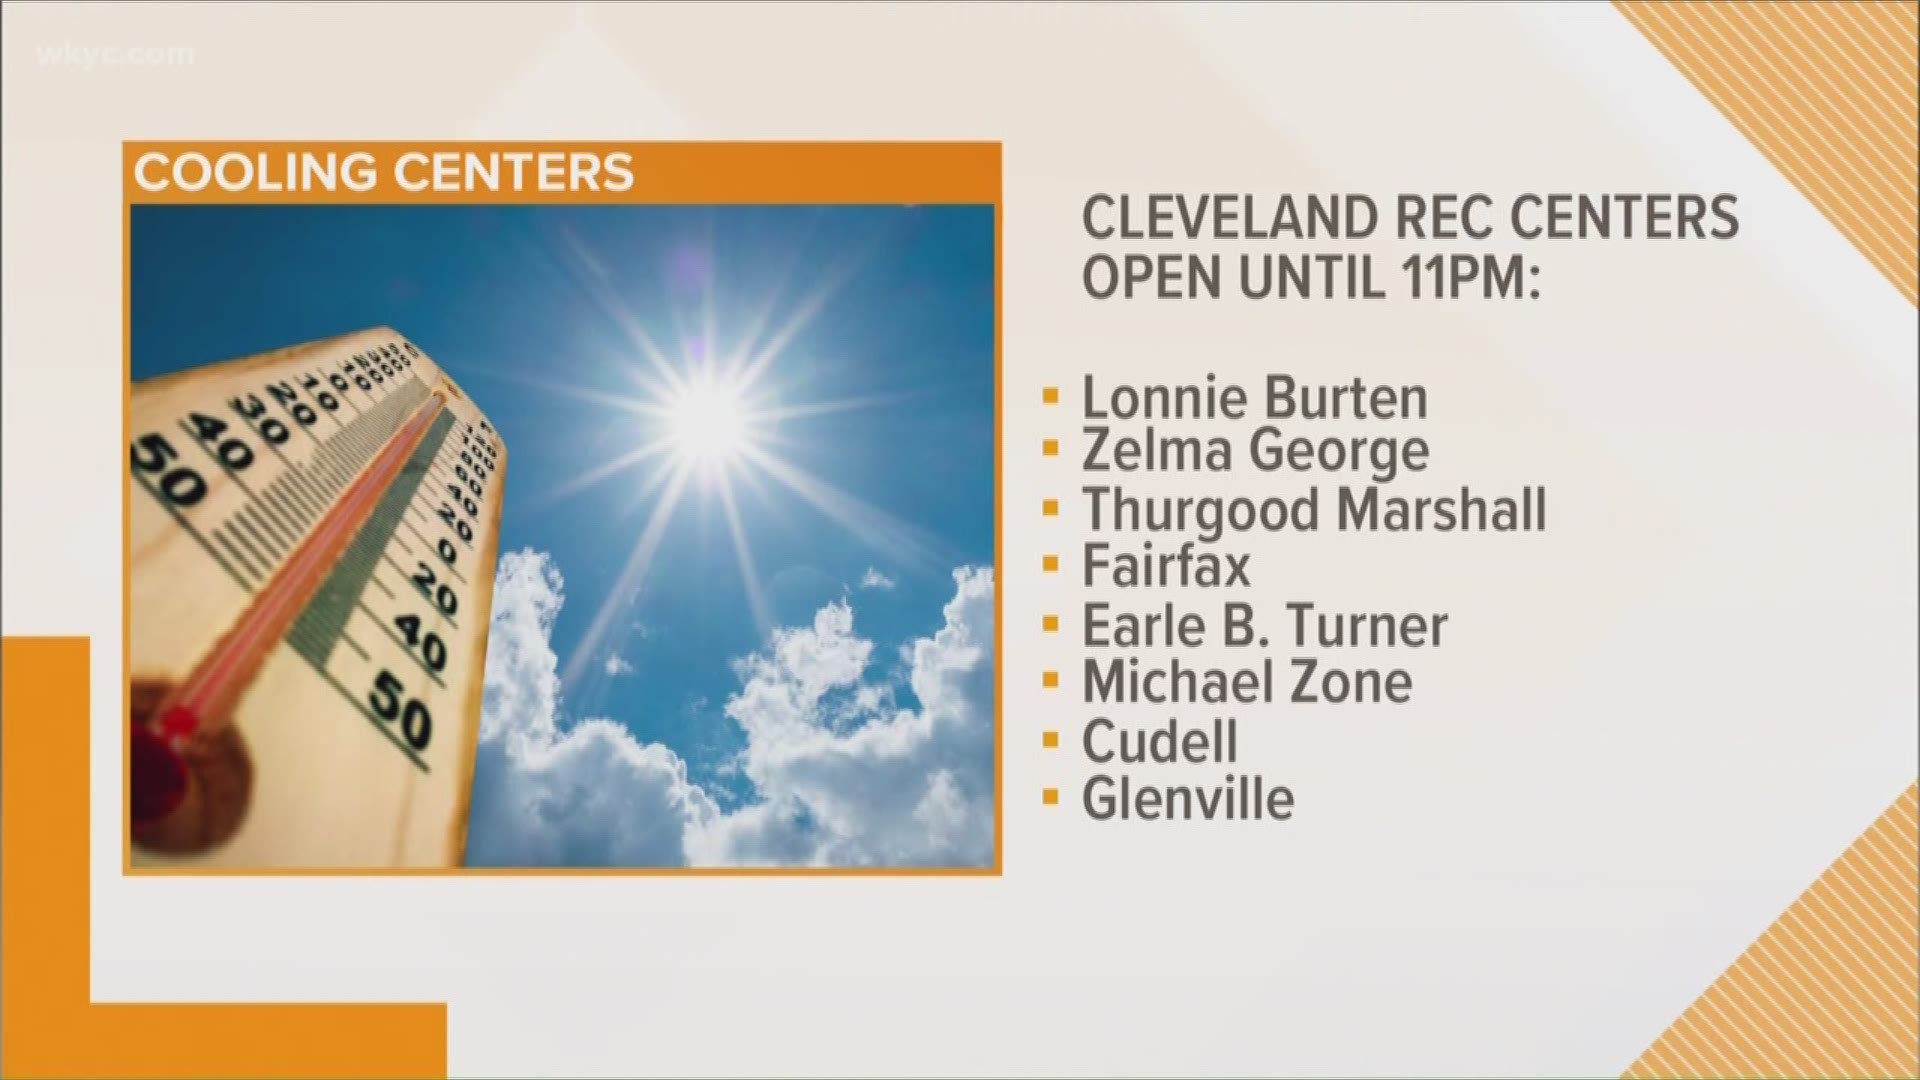 July 18, 2019: As Northeast Ohio prepares for dangerously hot temperatures in the days ahead, cooling centers are opening throughout the area. The National Weather Service says the heat indexes Friday and Saturday could top 110+ degrees.